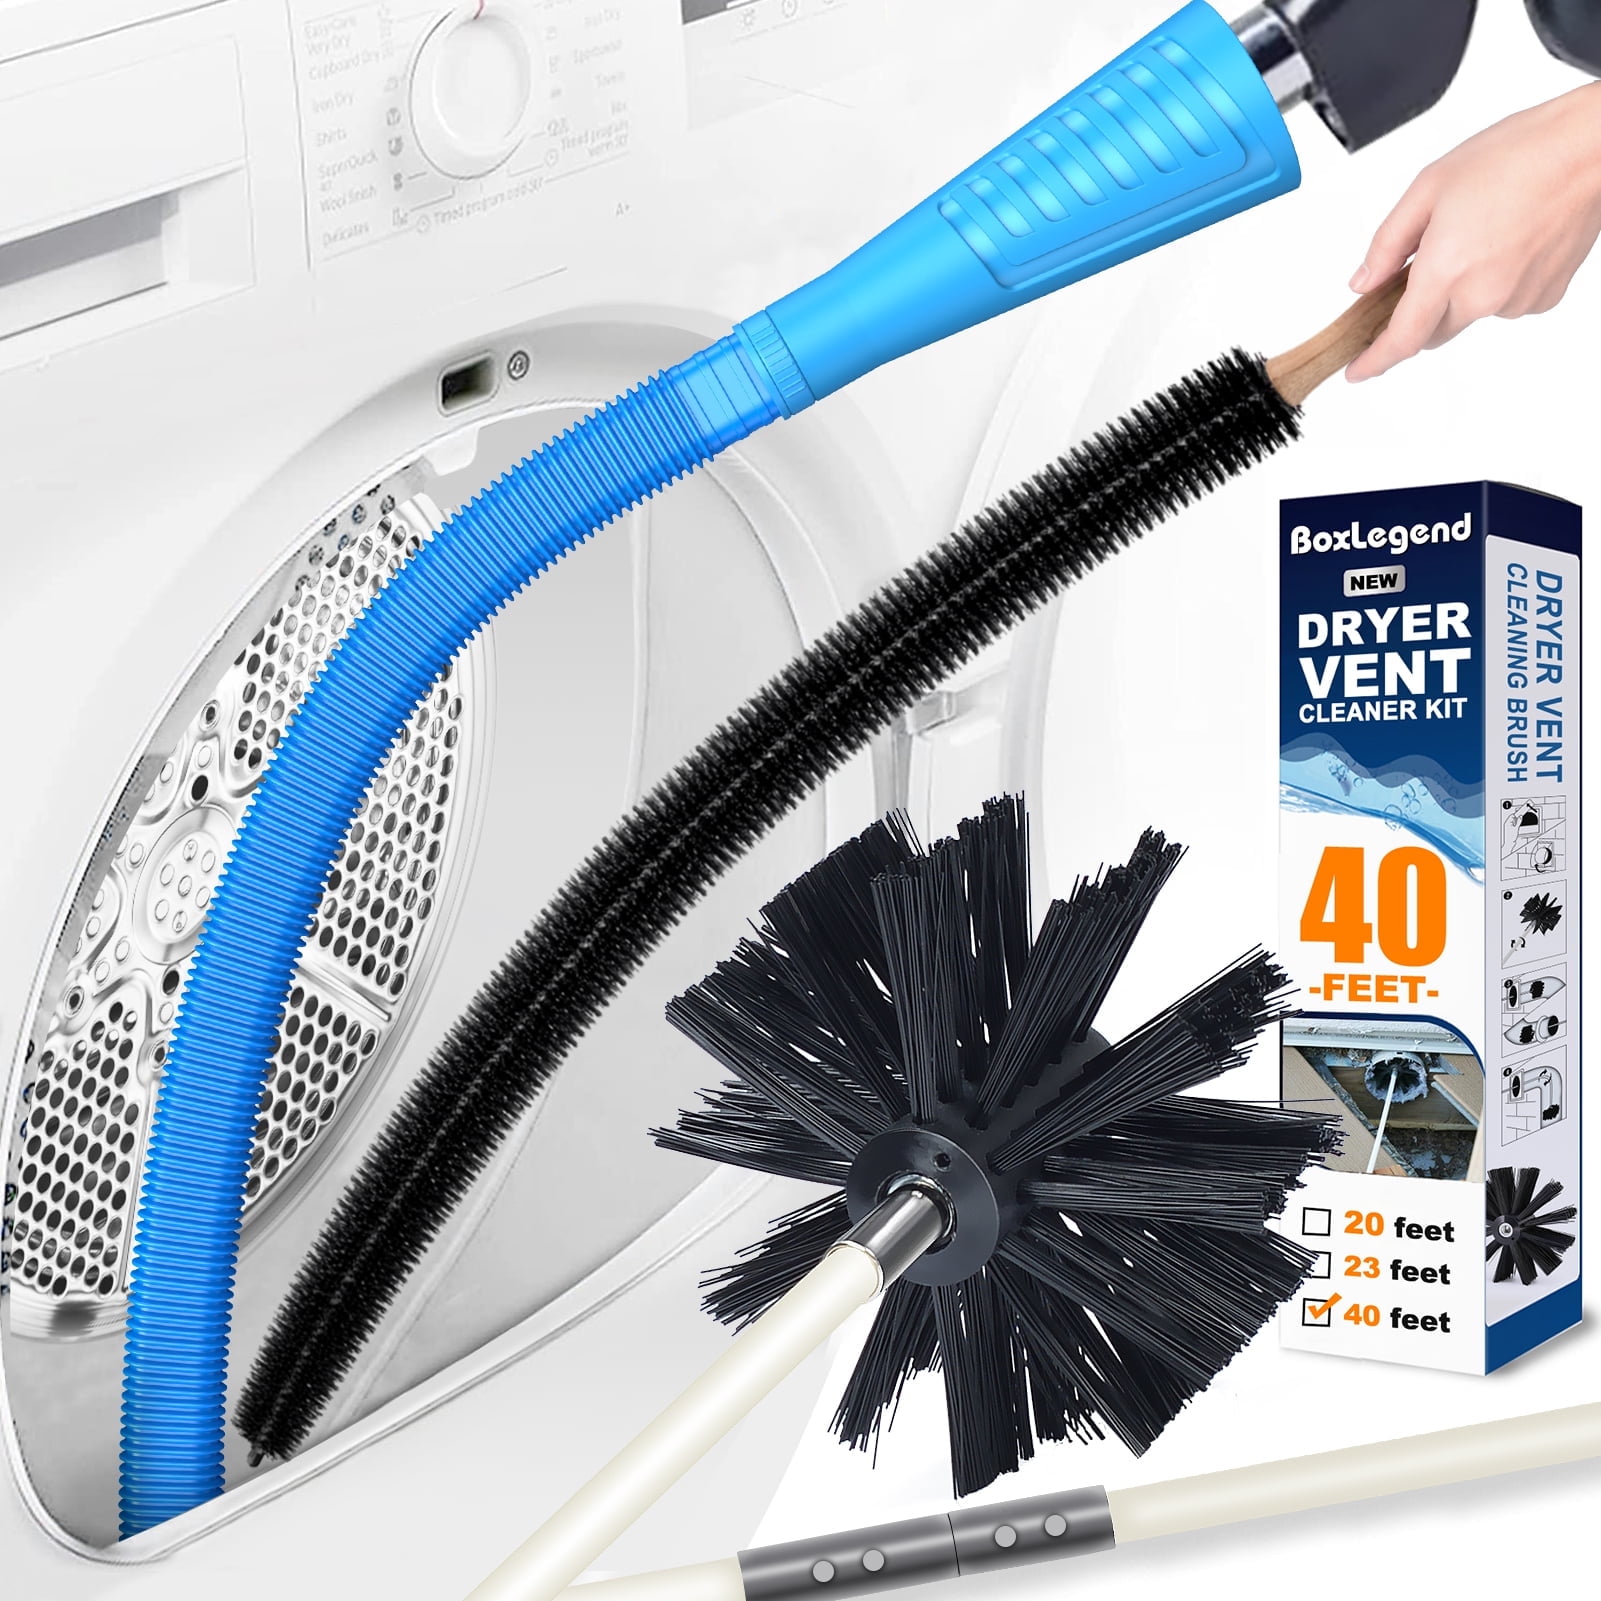 Keep Your Home Safe With This Dryer Vent Cleaner Kit - Lint Brush